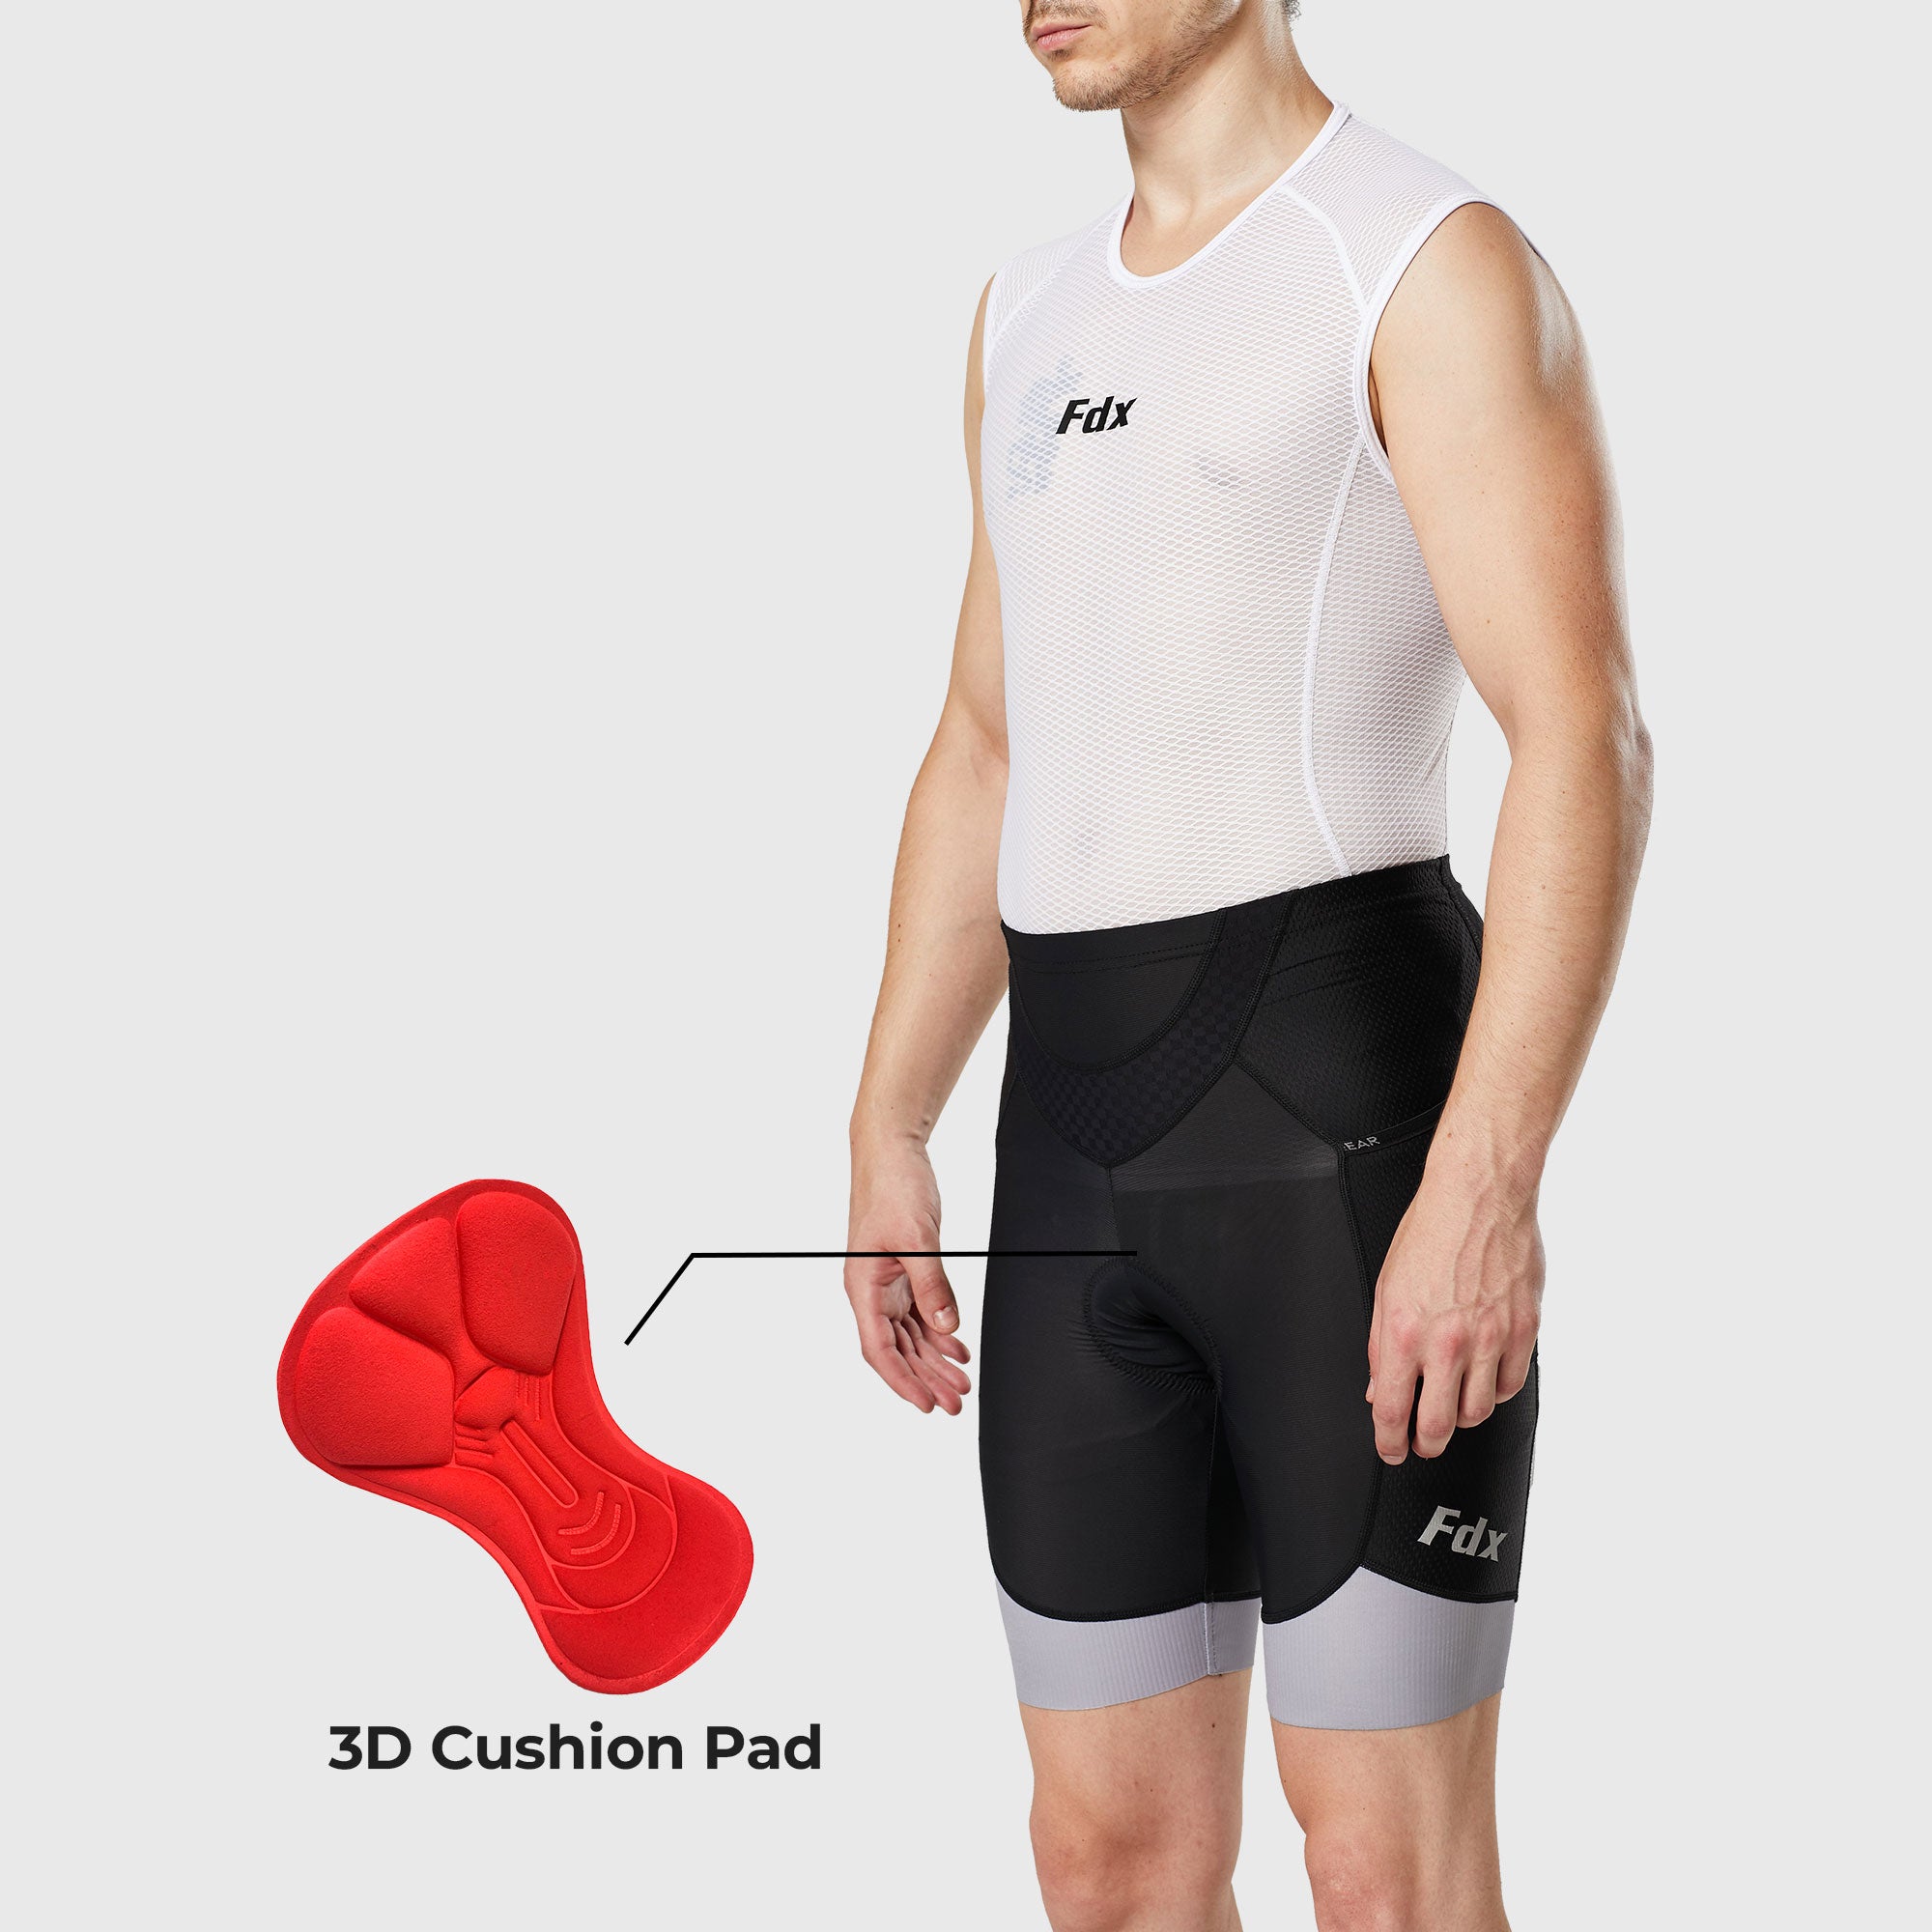 Fdx Essential Grey Men's Padded Cycling Shorts with Pockets